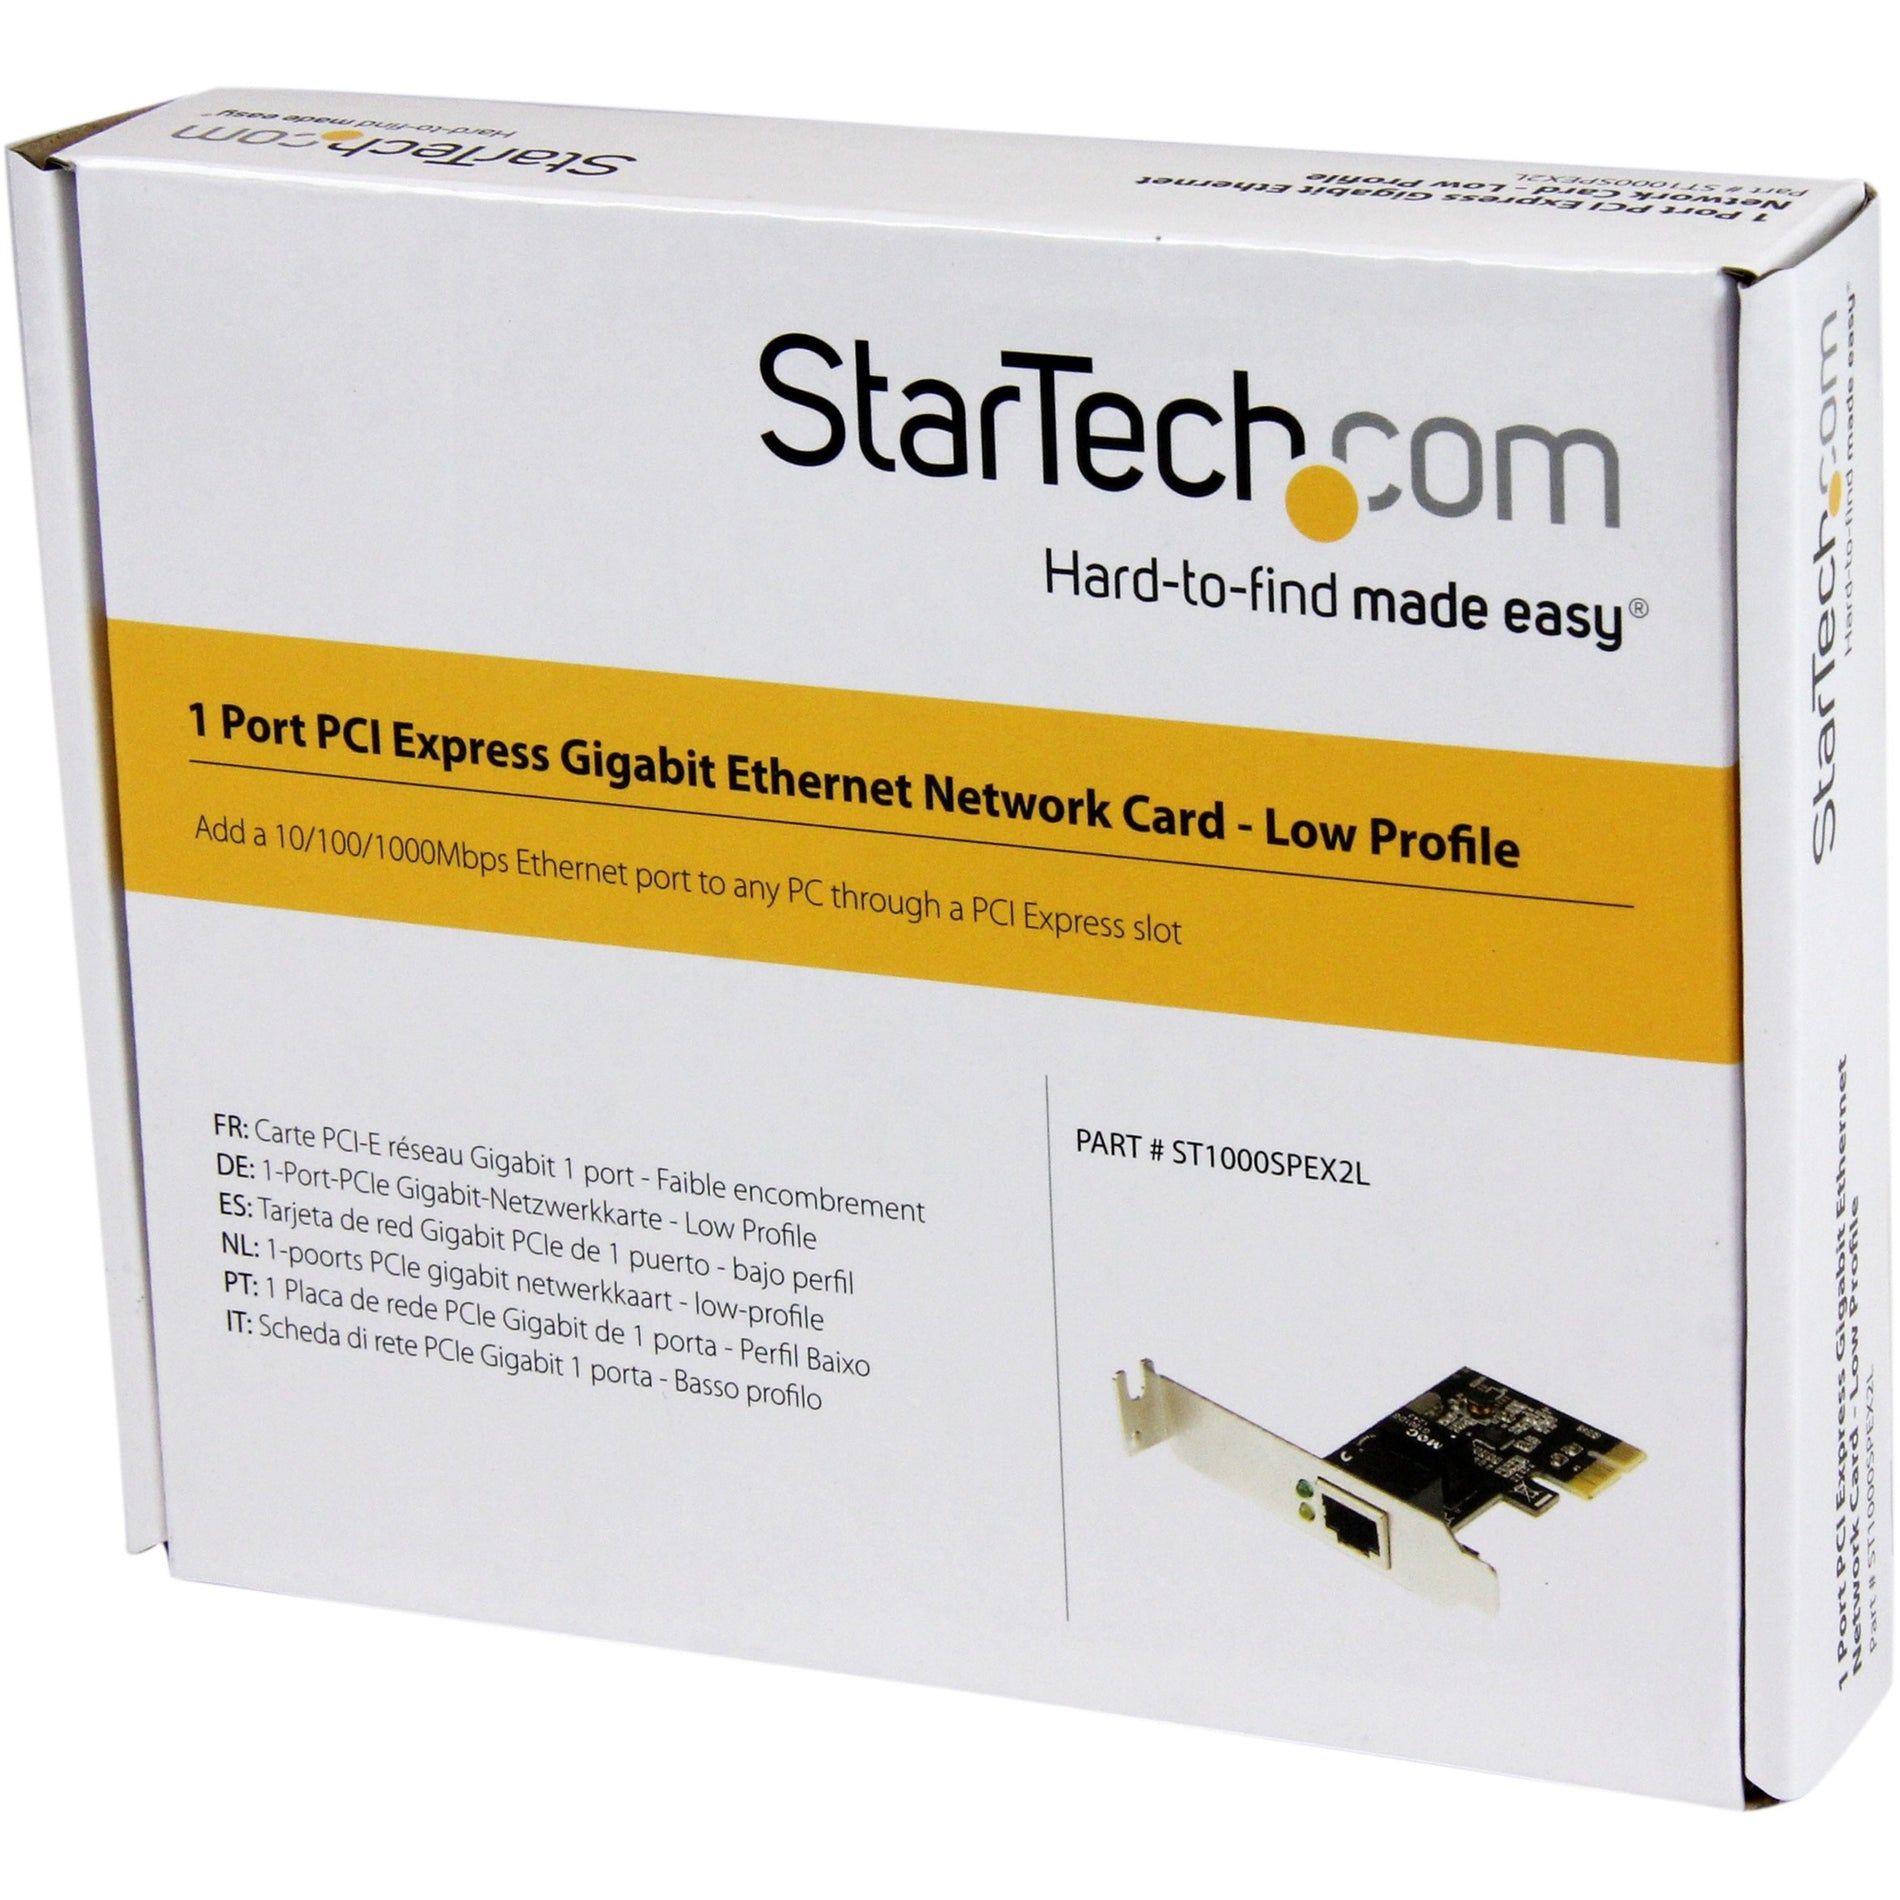 StarTech.com ST1000SPEX2L 1 Port PCI Express PCIe Gigabit NIC Server Adapter Network Card - Low Profile, 2 Year Warranty, 125 MB/s Data Transfer Rate, Twisted Pair Media Type Supported